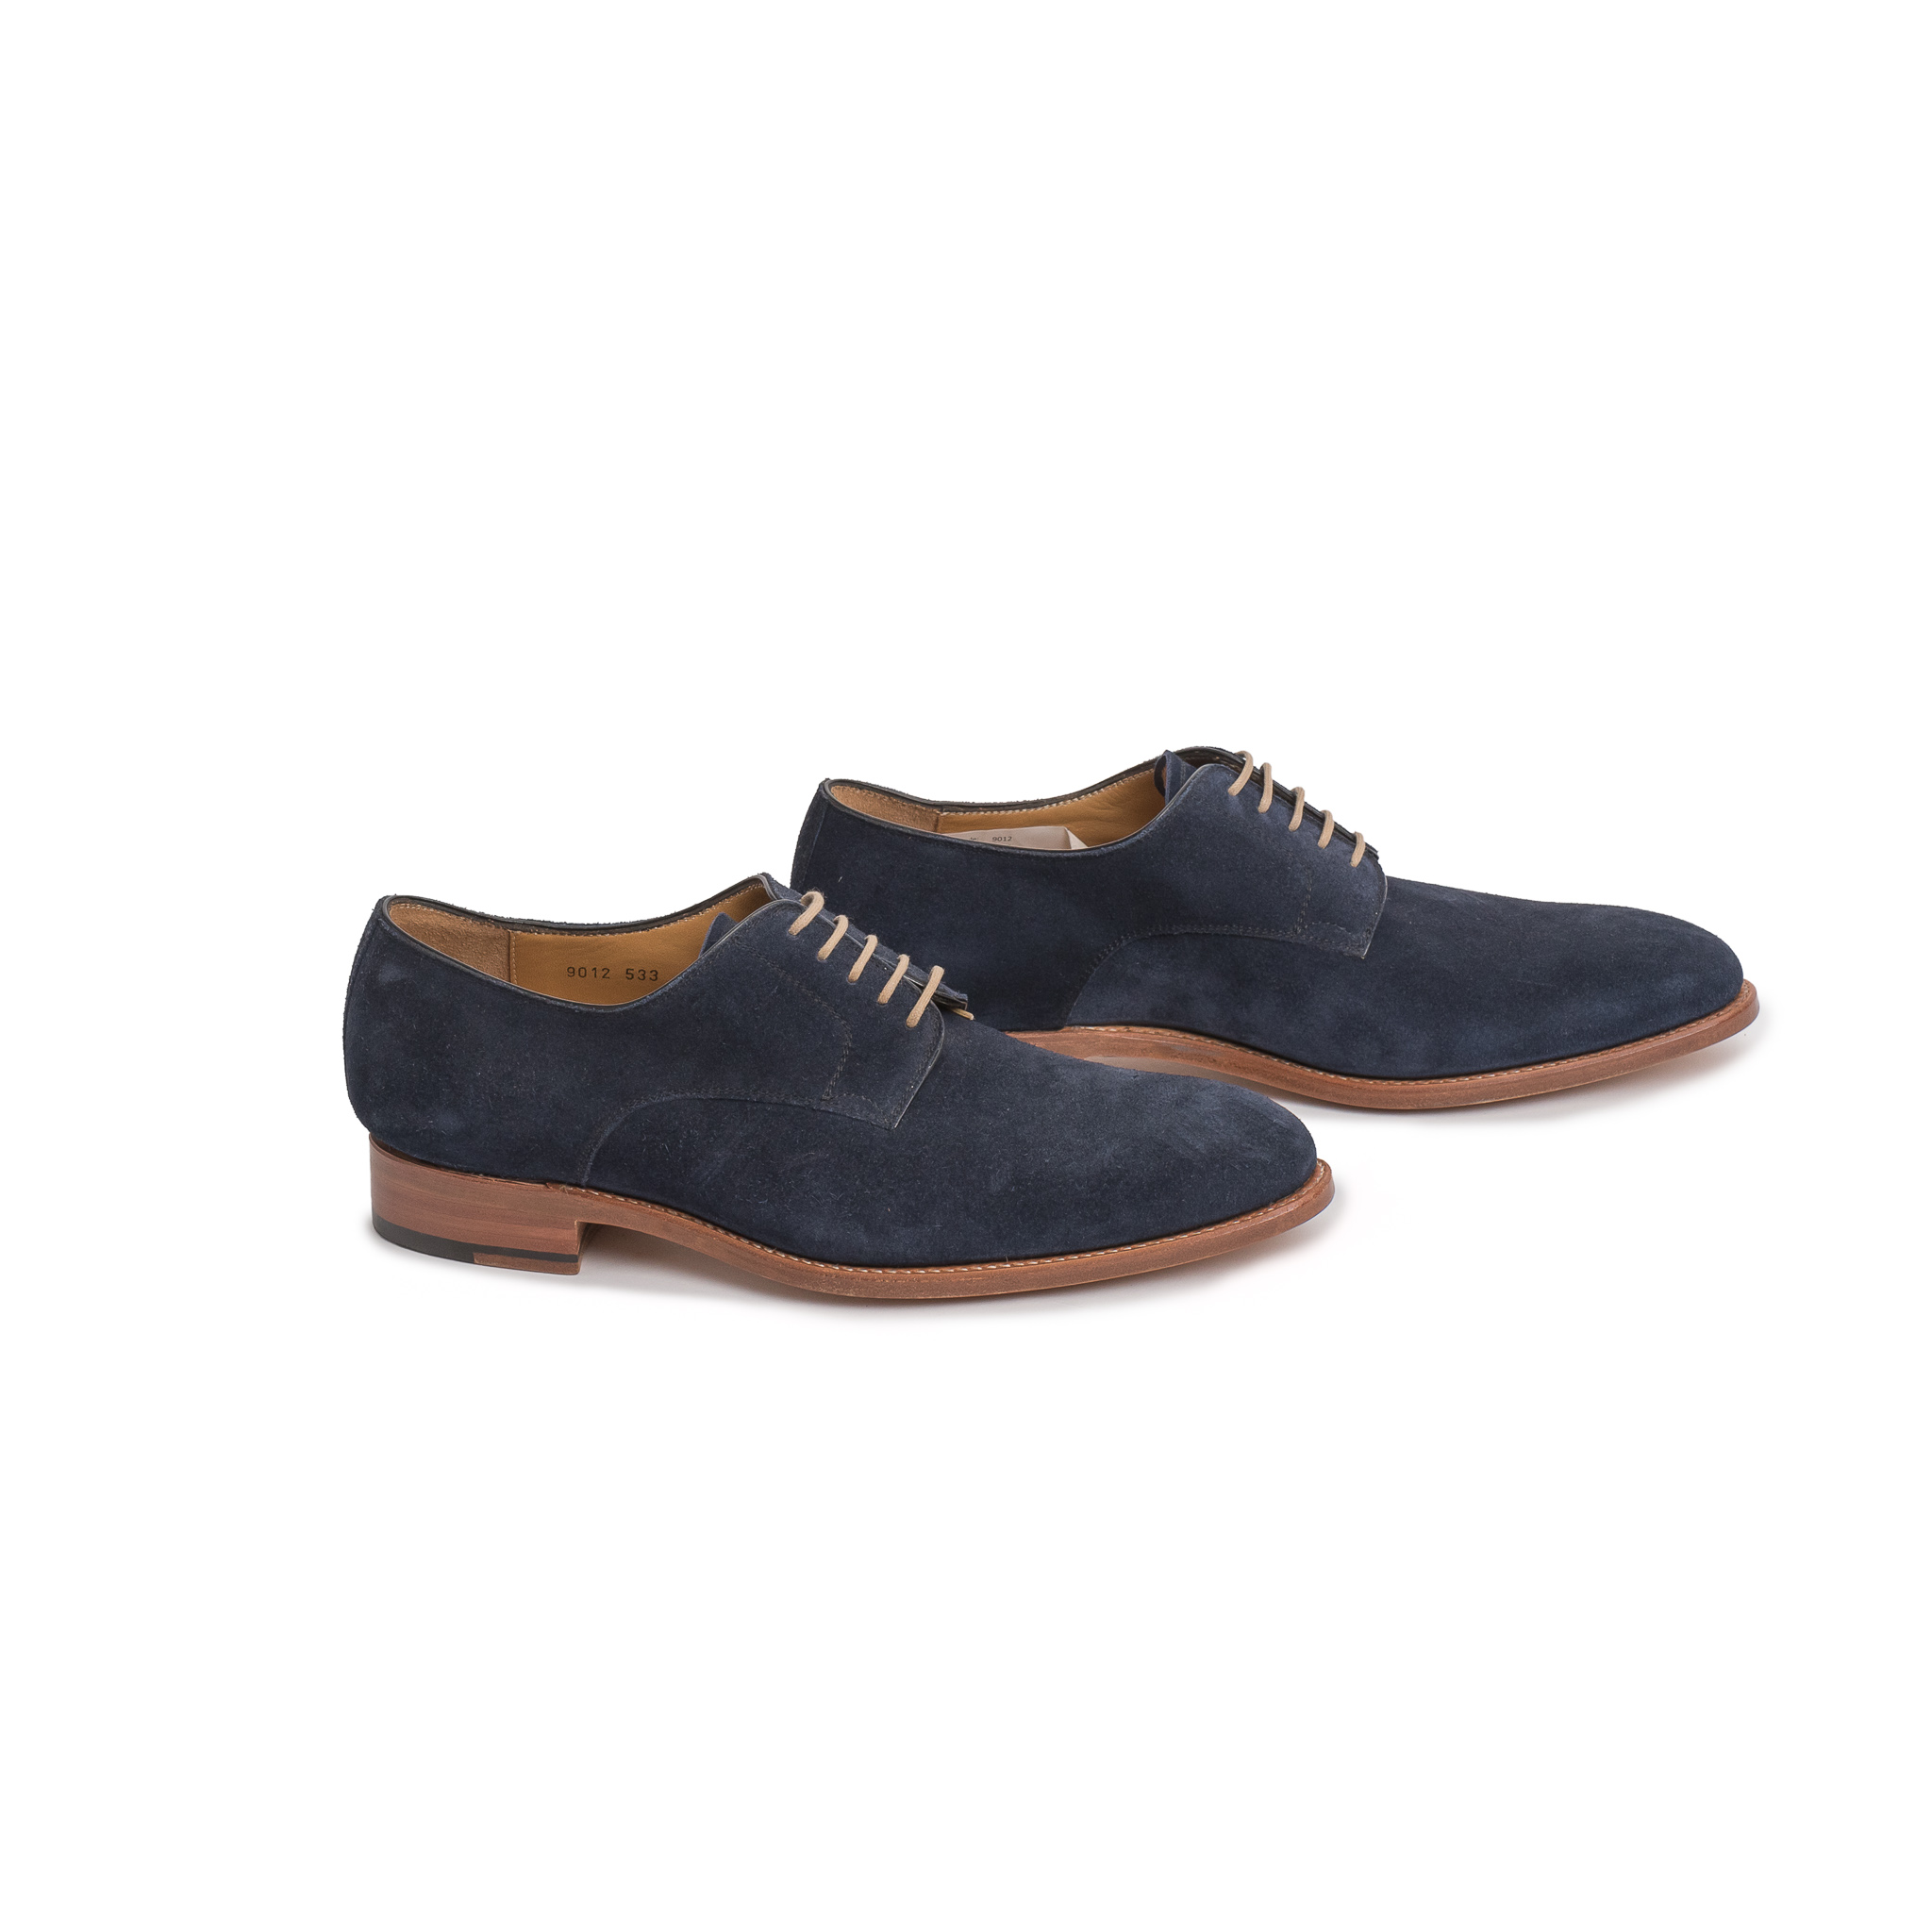 Carlos Santos Blue Suede Derby Shoes Goodyear Welted Style 9012 - 9 US ...